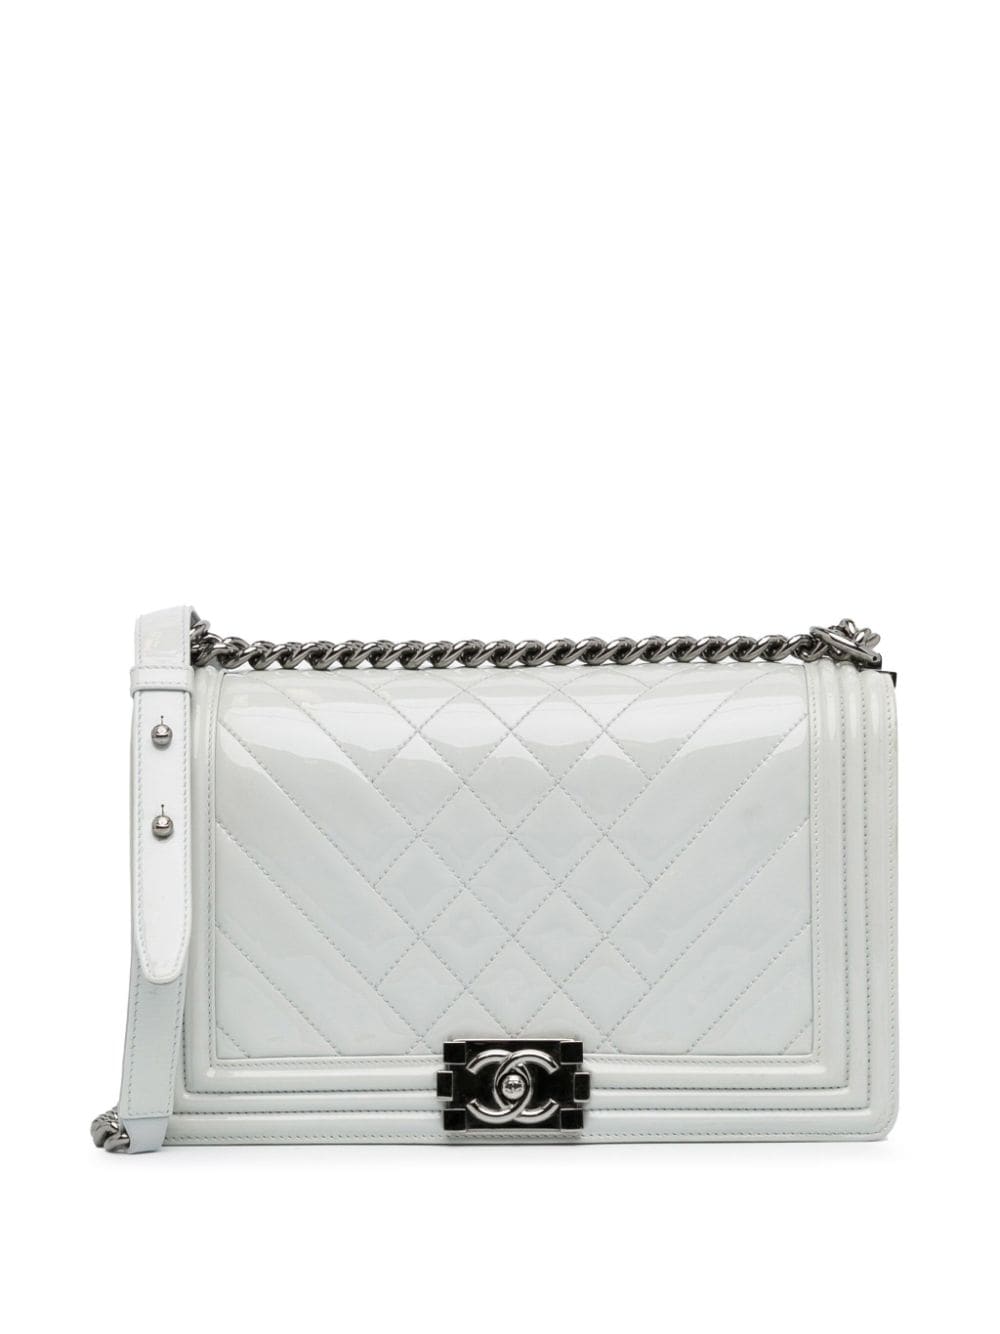 Pre-owned Chanel 2014 Medium Patent Boy Flap Crossbody Bag In White